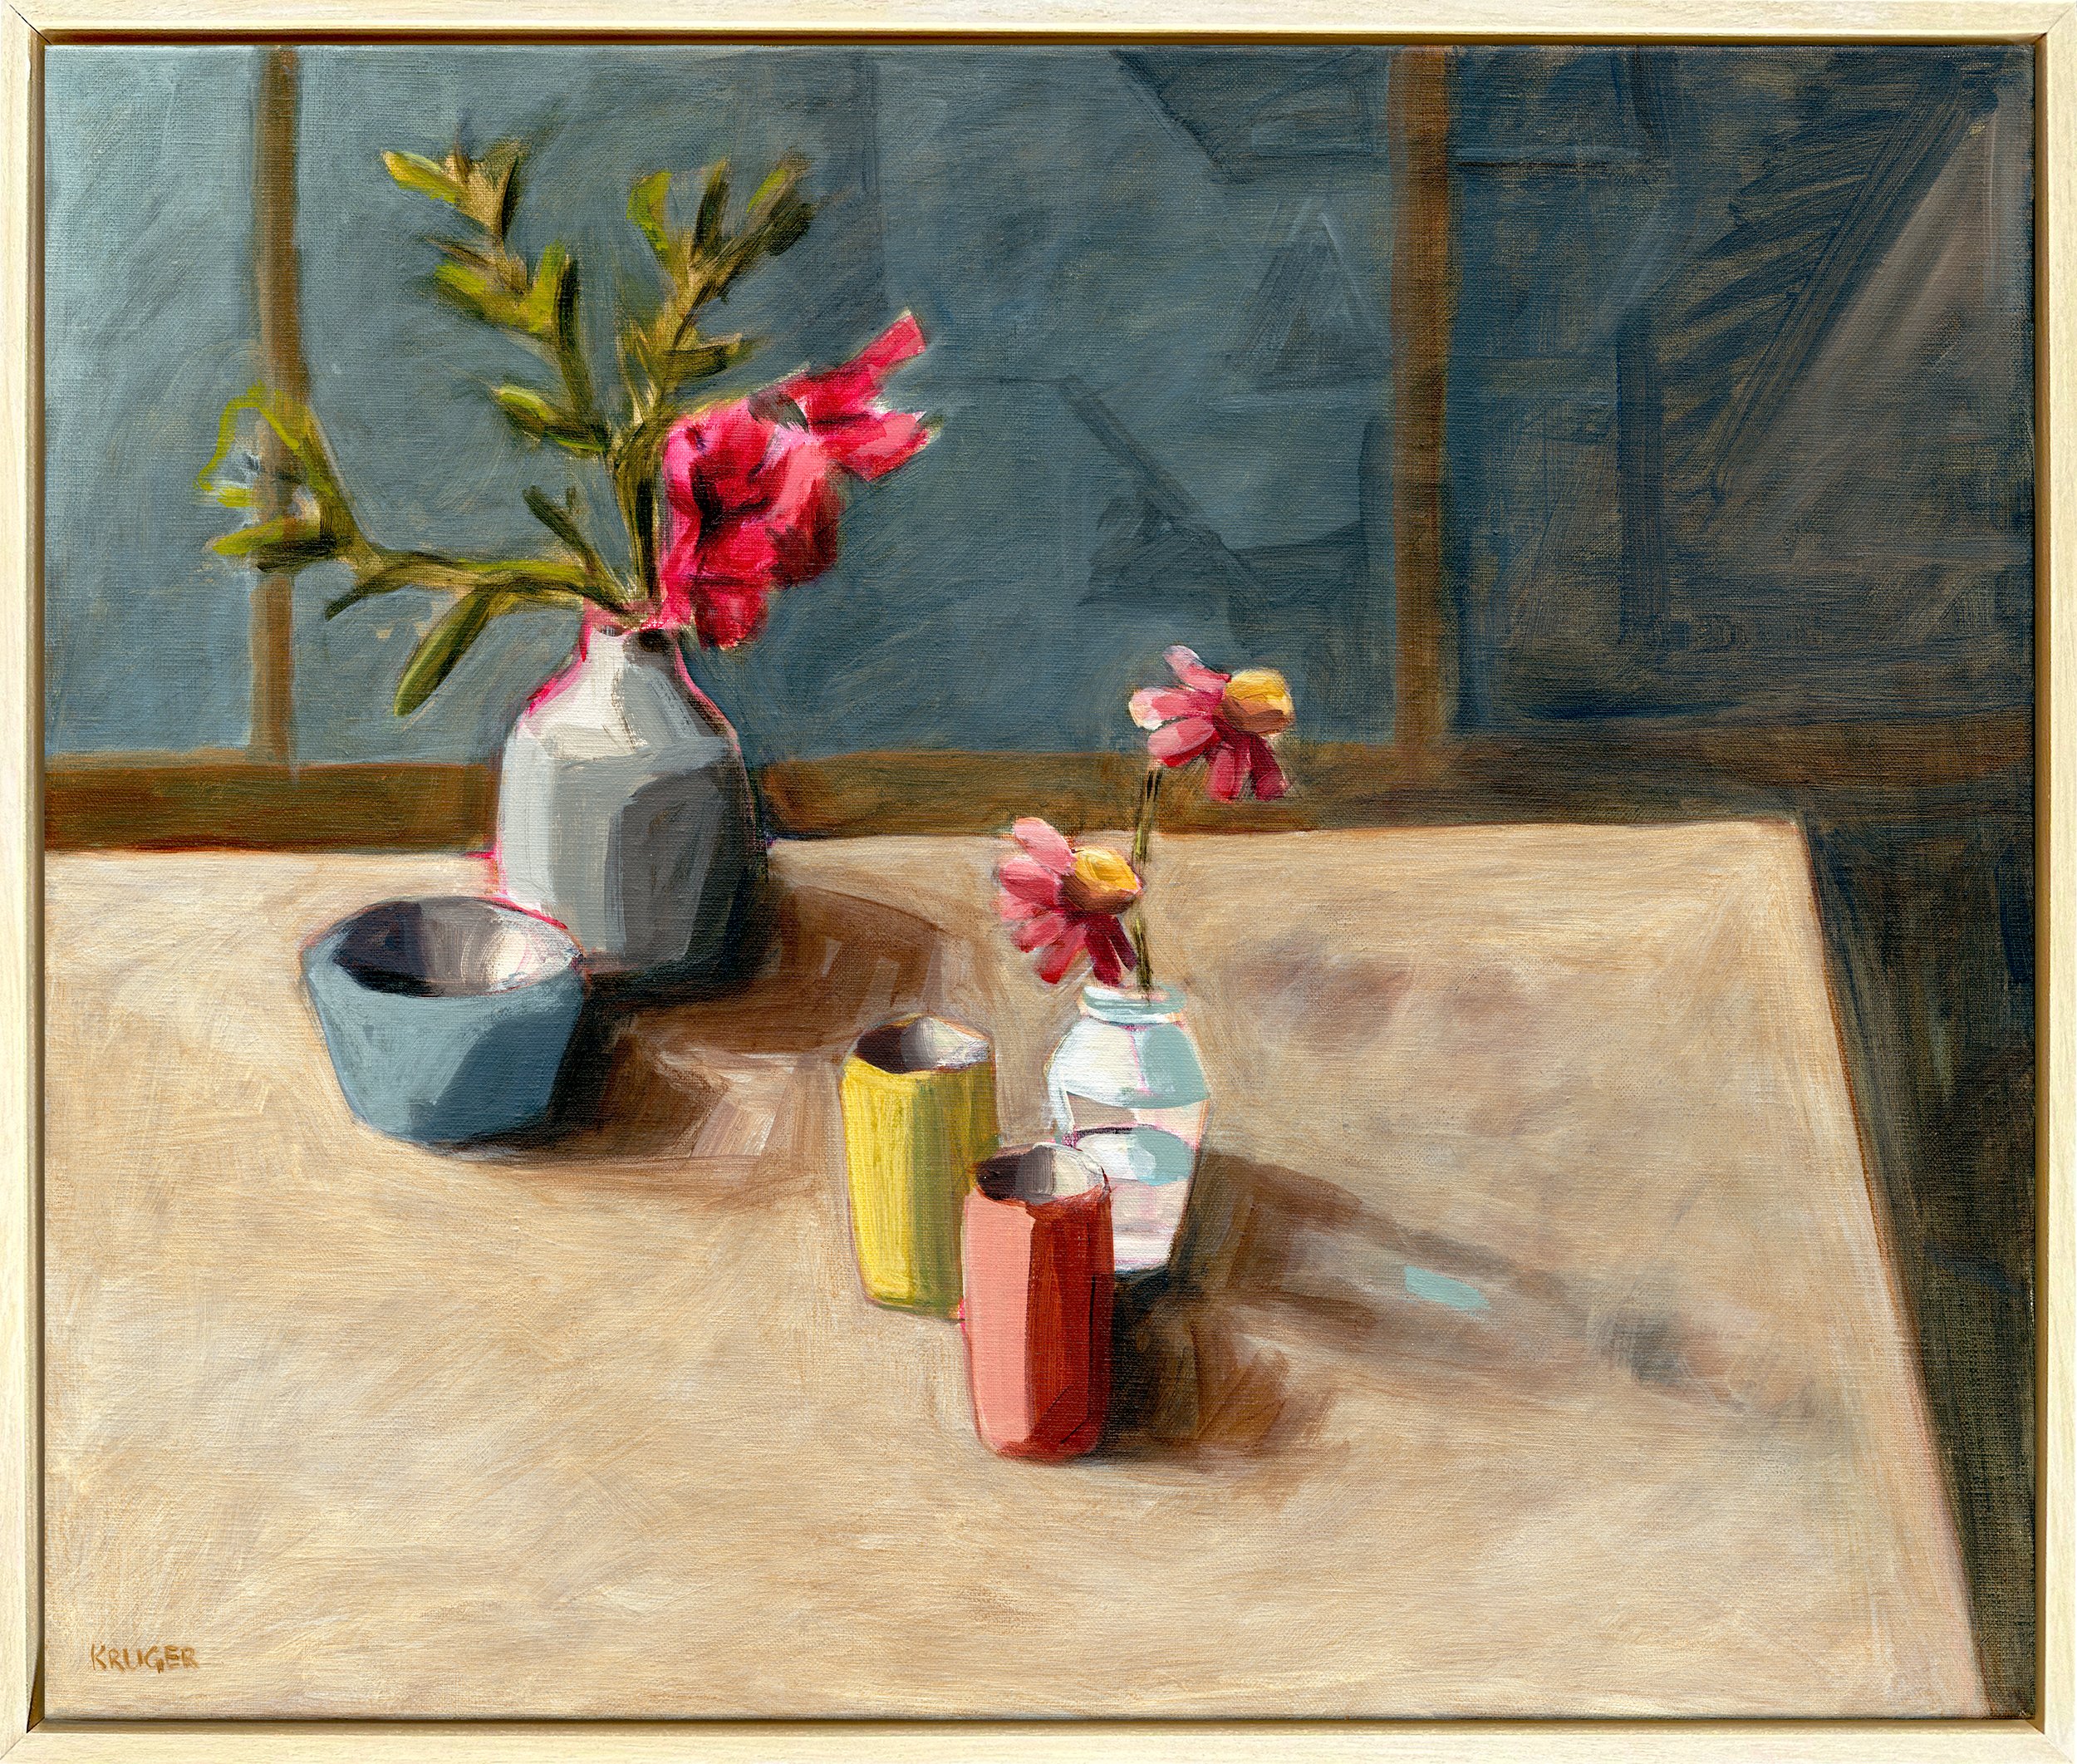 "Afternoon table"